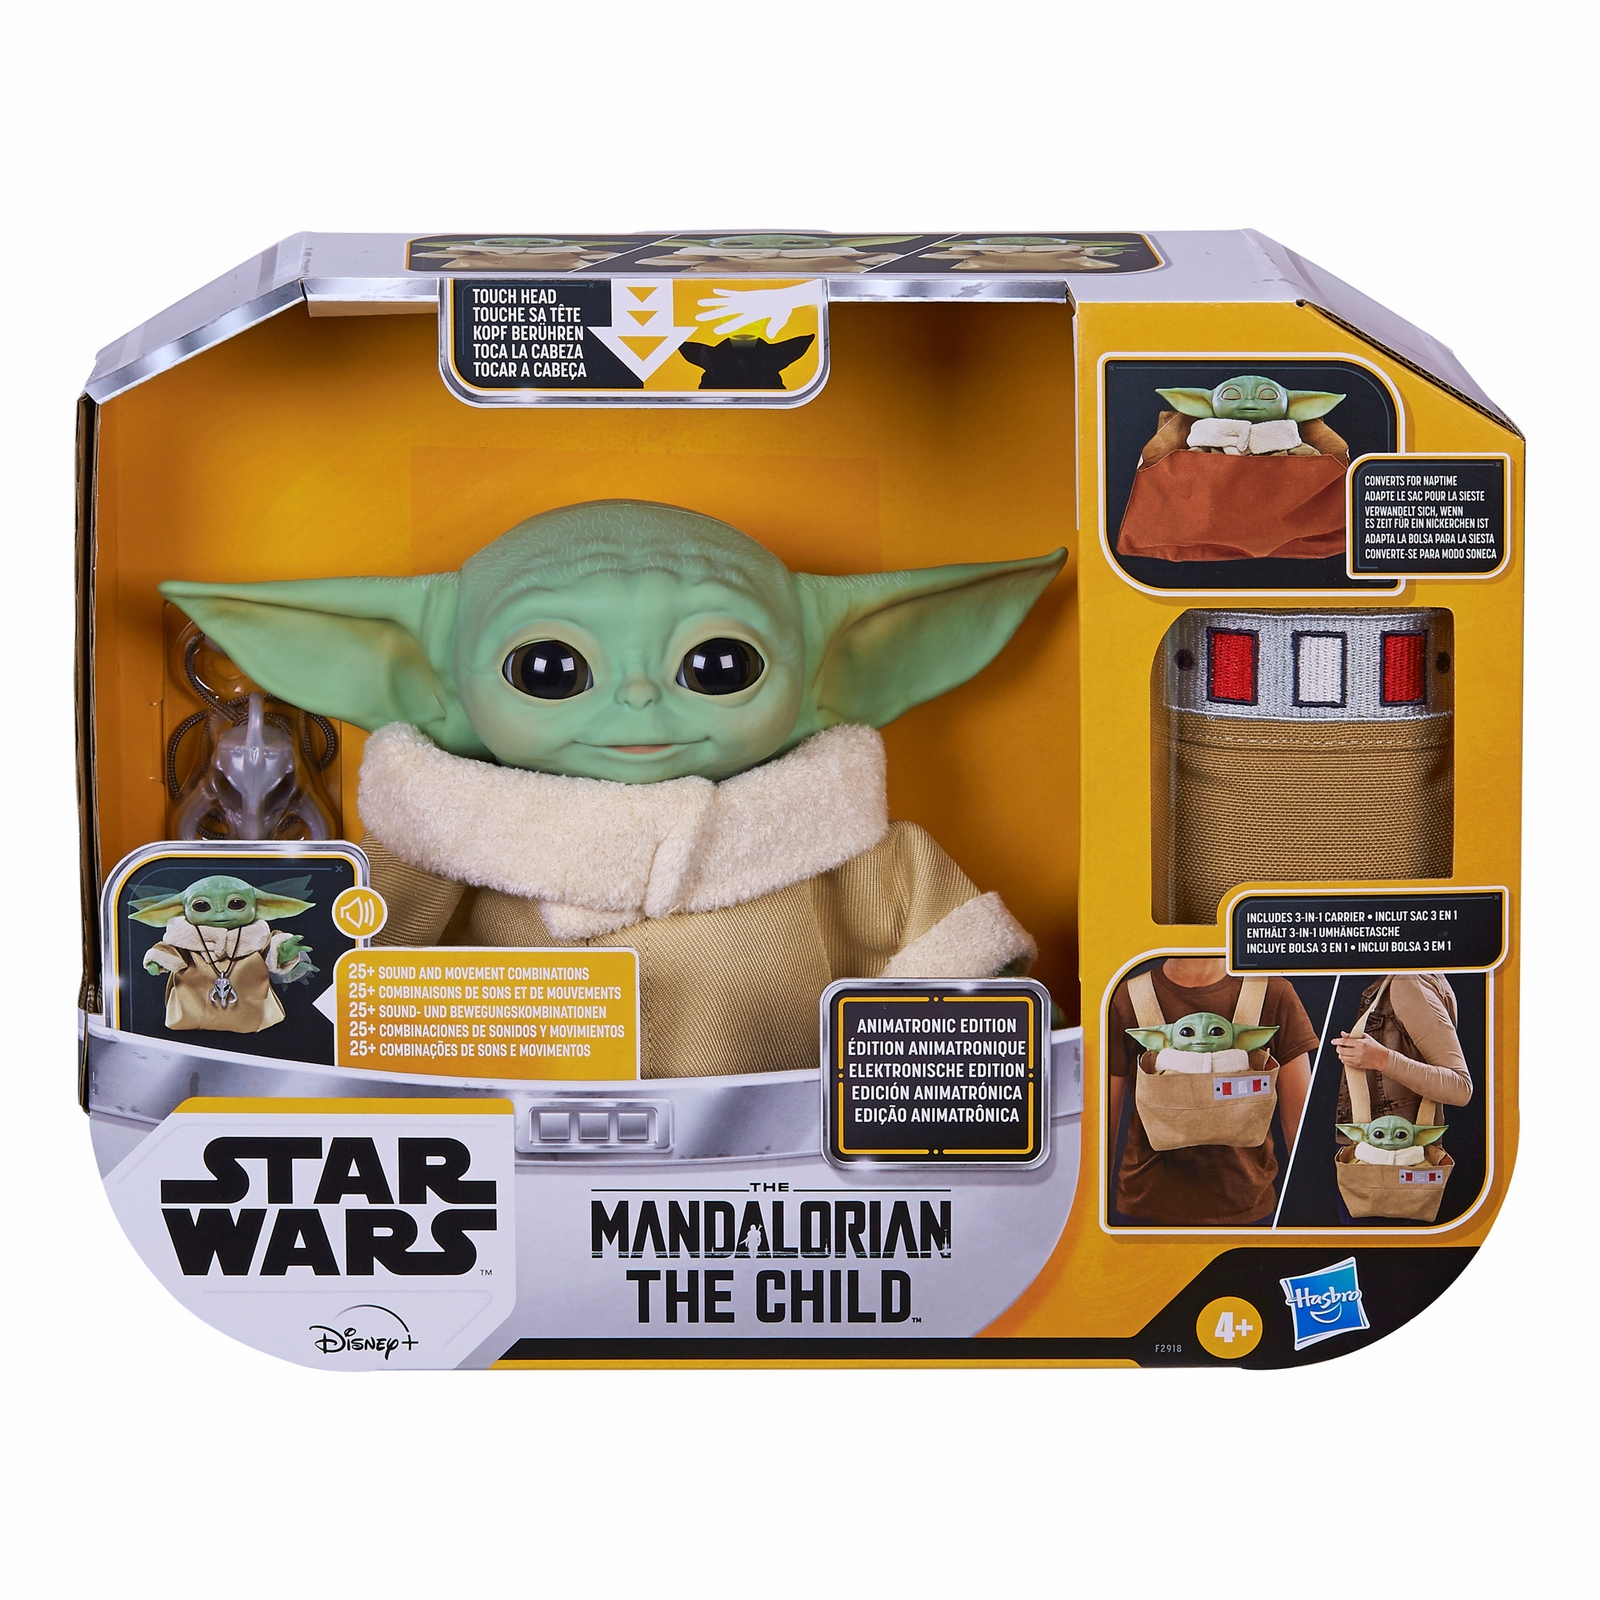 STAR WARS THE CHILD ANIMATRONIC EDITION WITH 3-IN-1 CARRIER - in pck (1).jpg